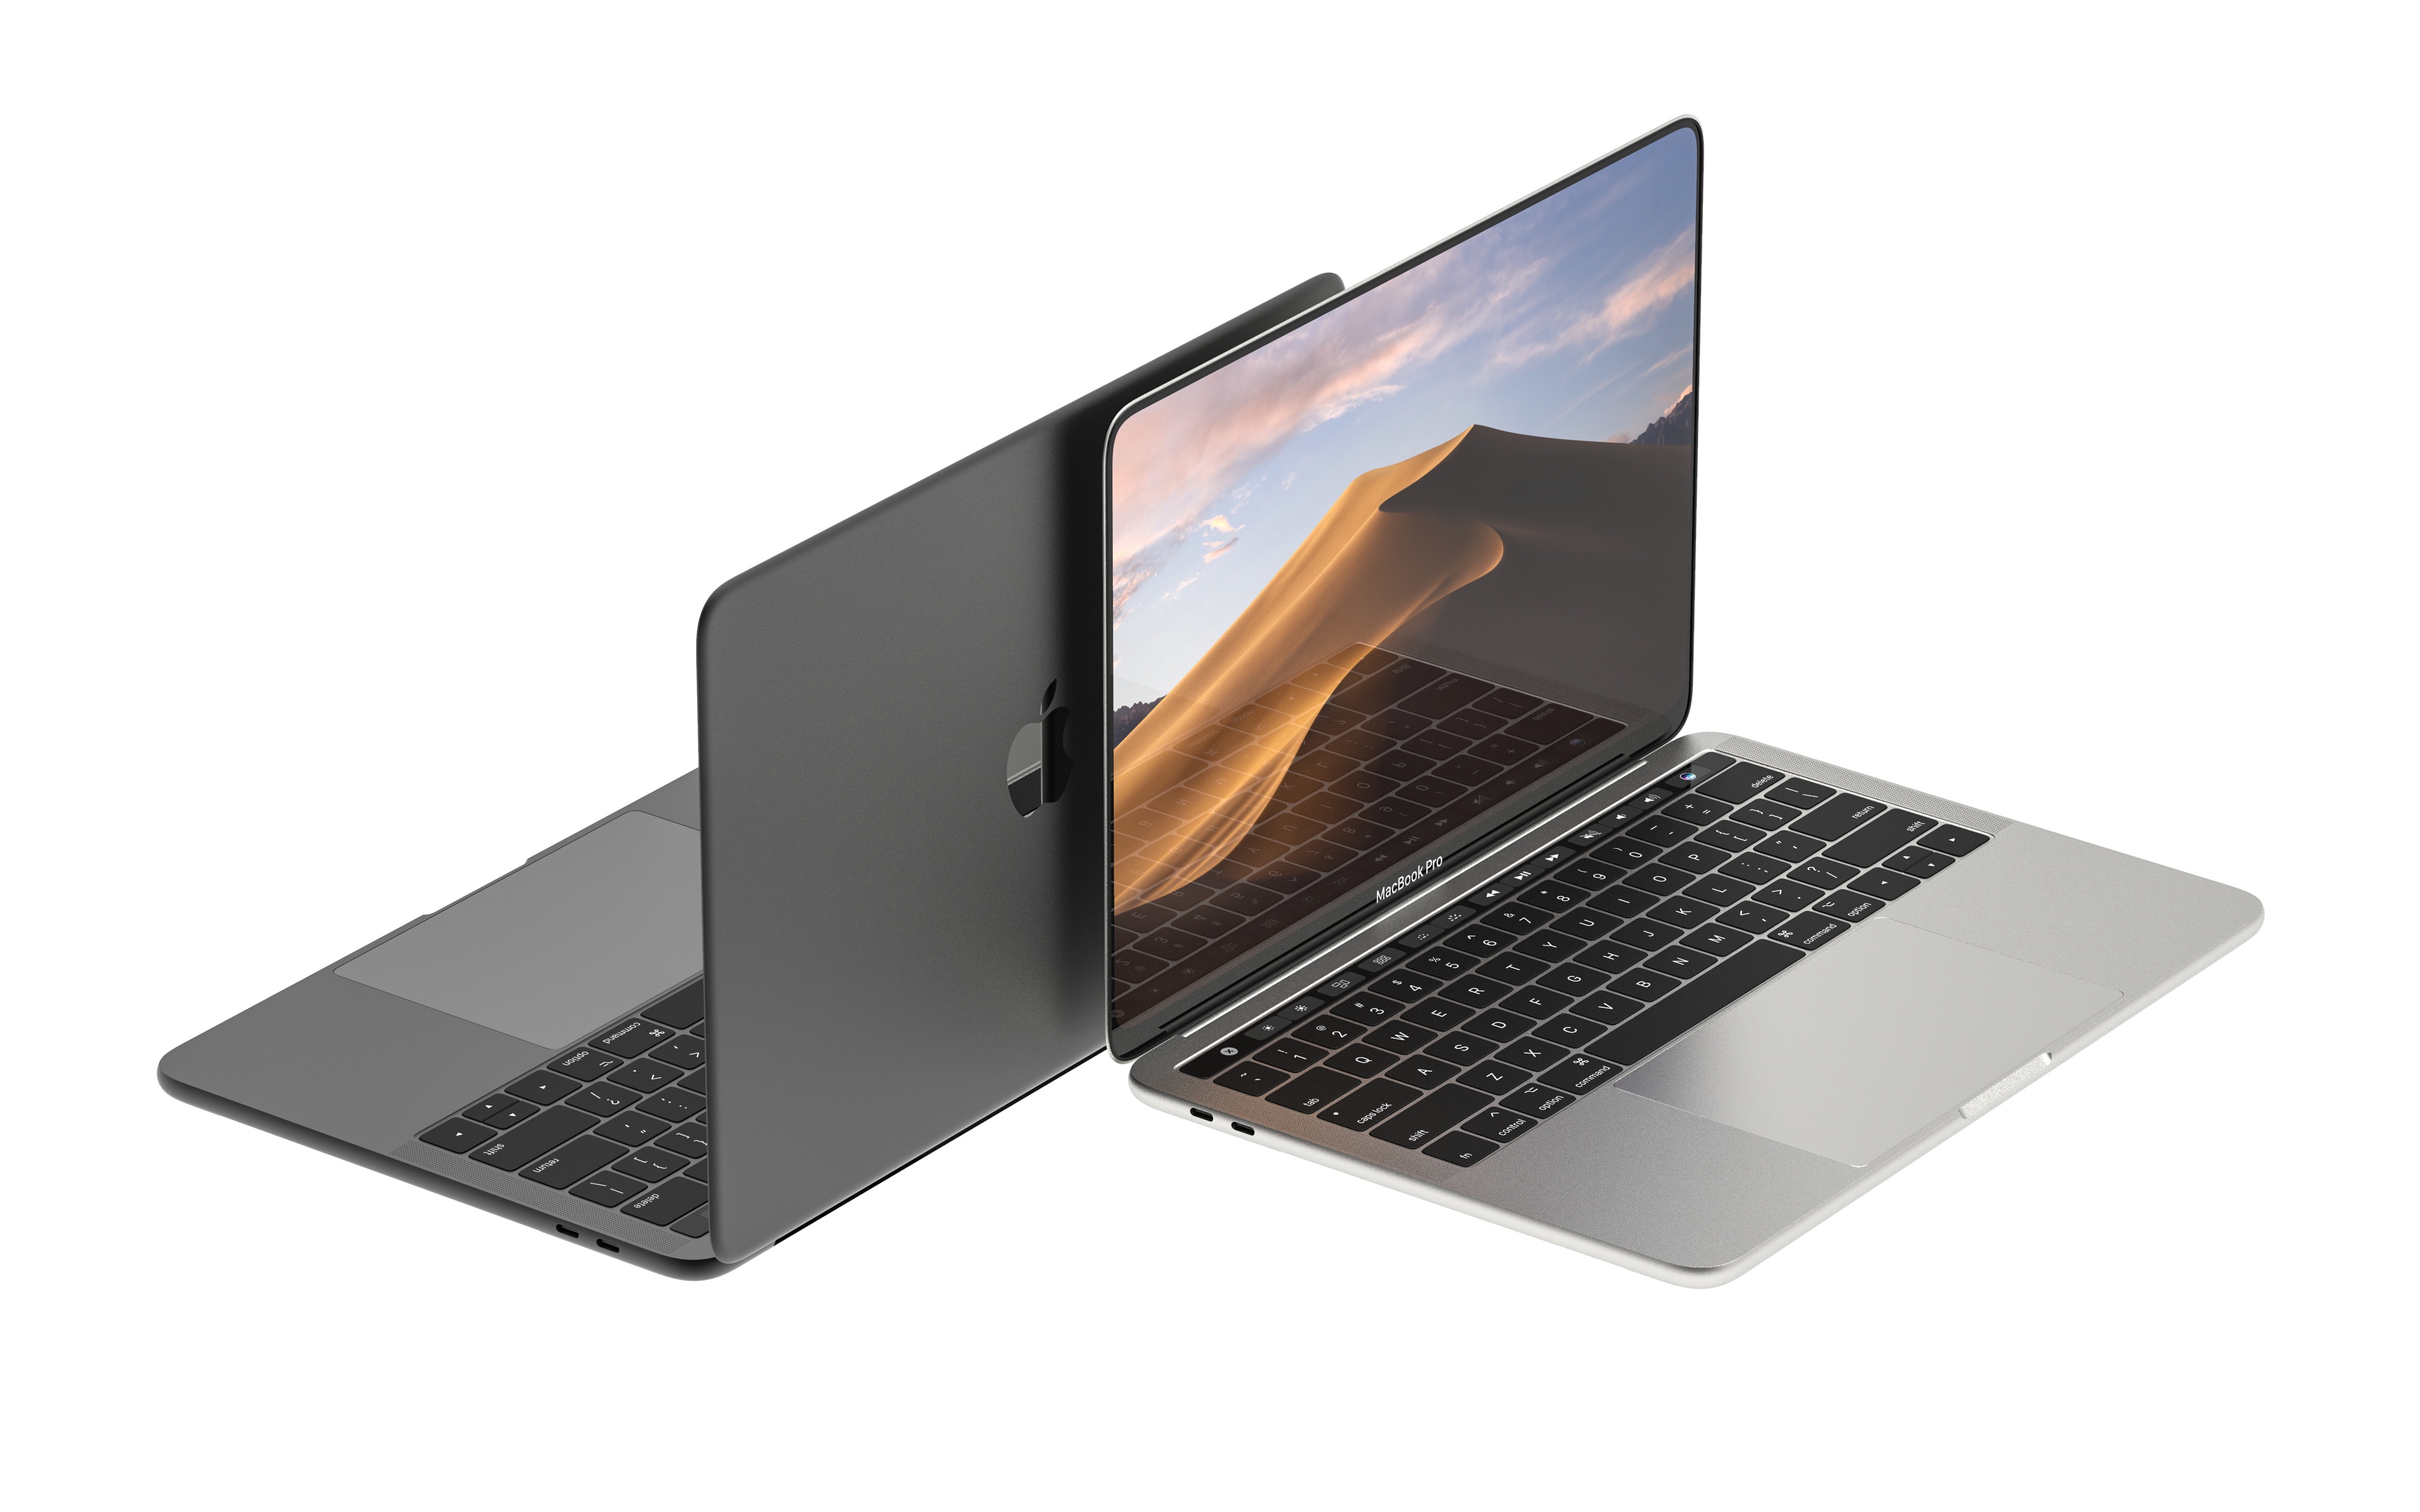 What Photographers Would Like to See in a 16 Inch MacBook Pro